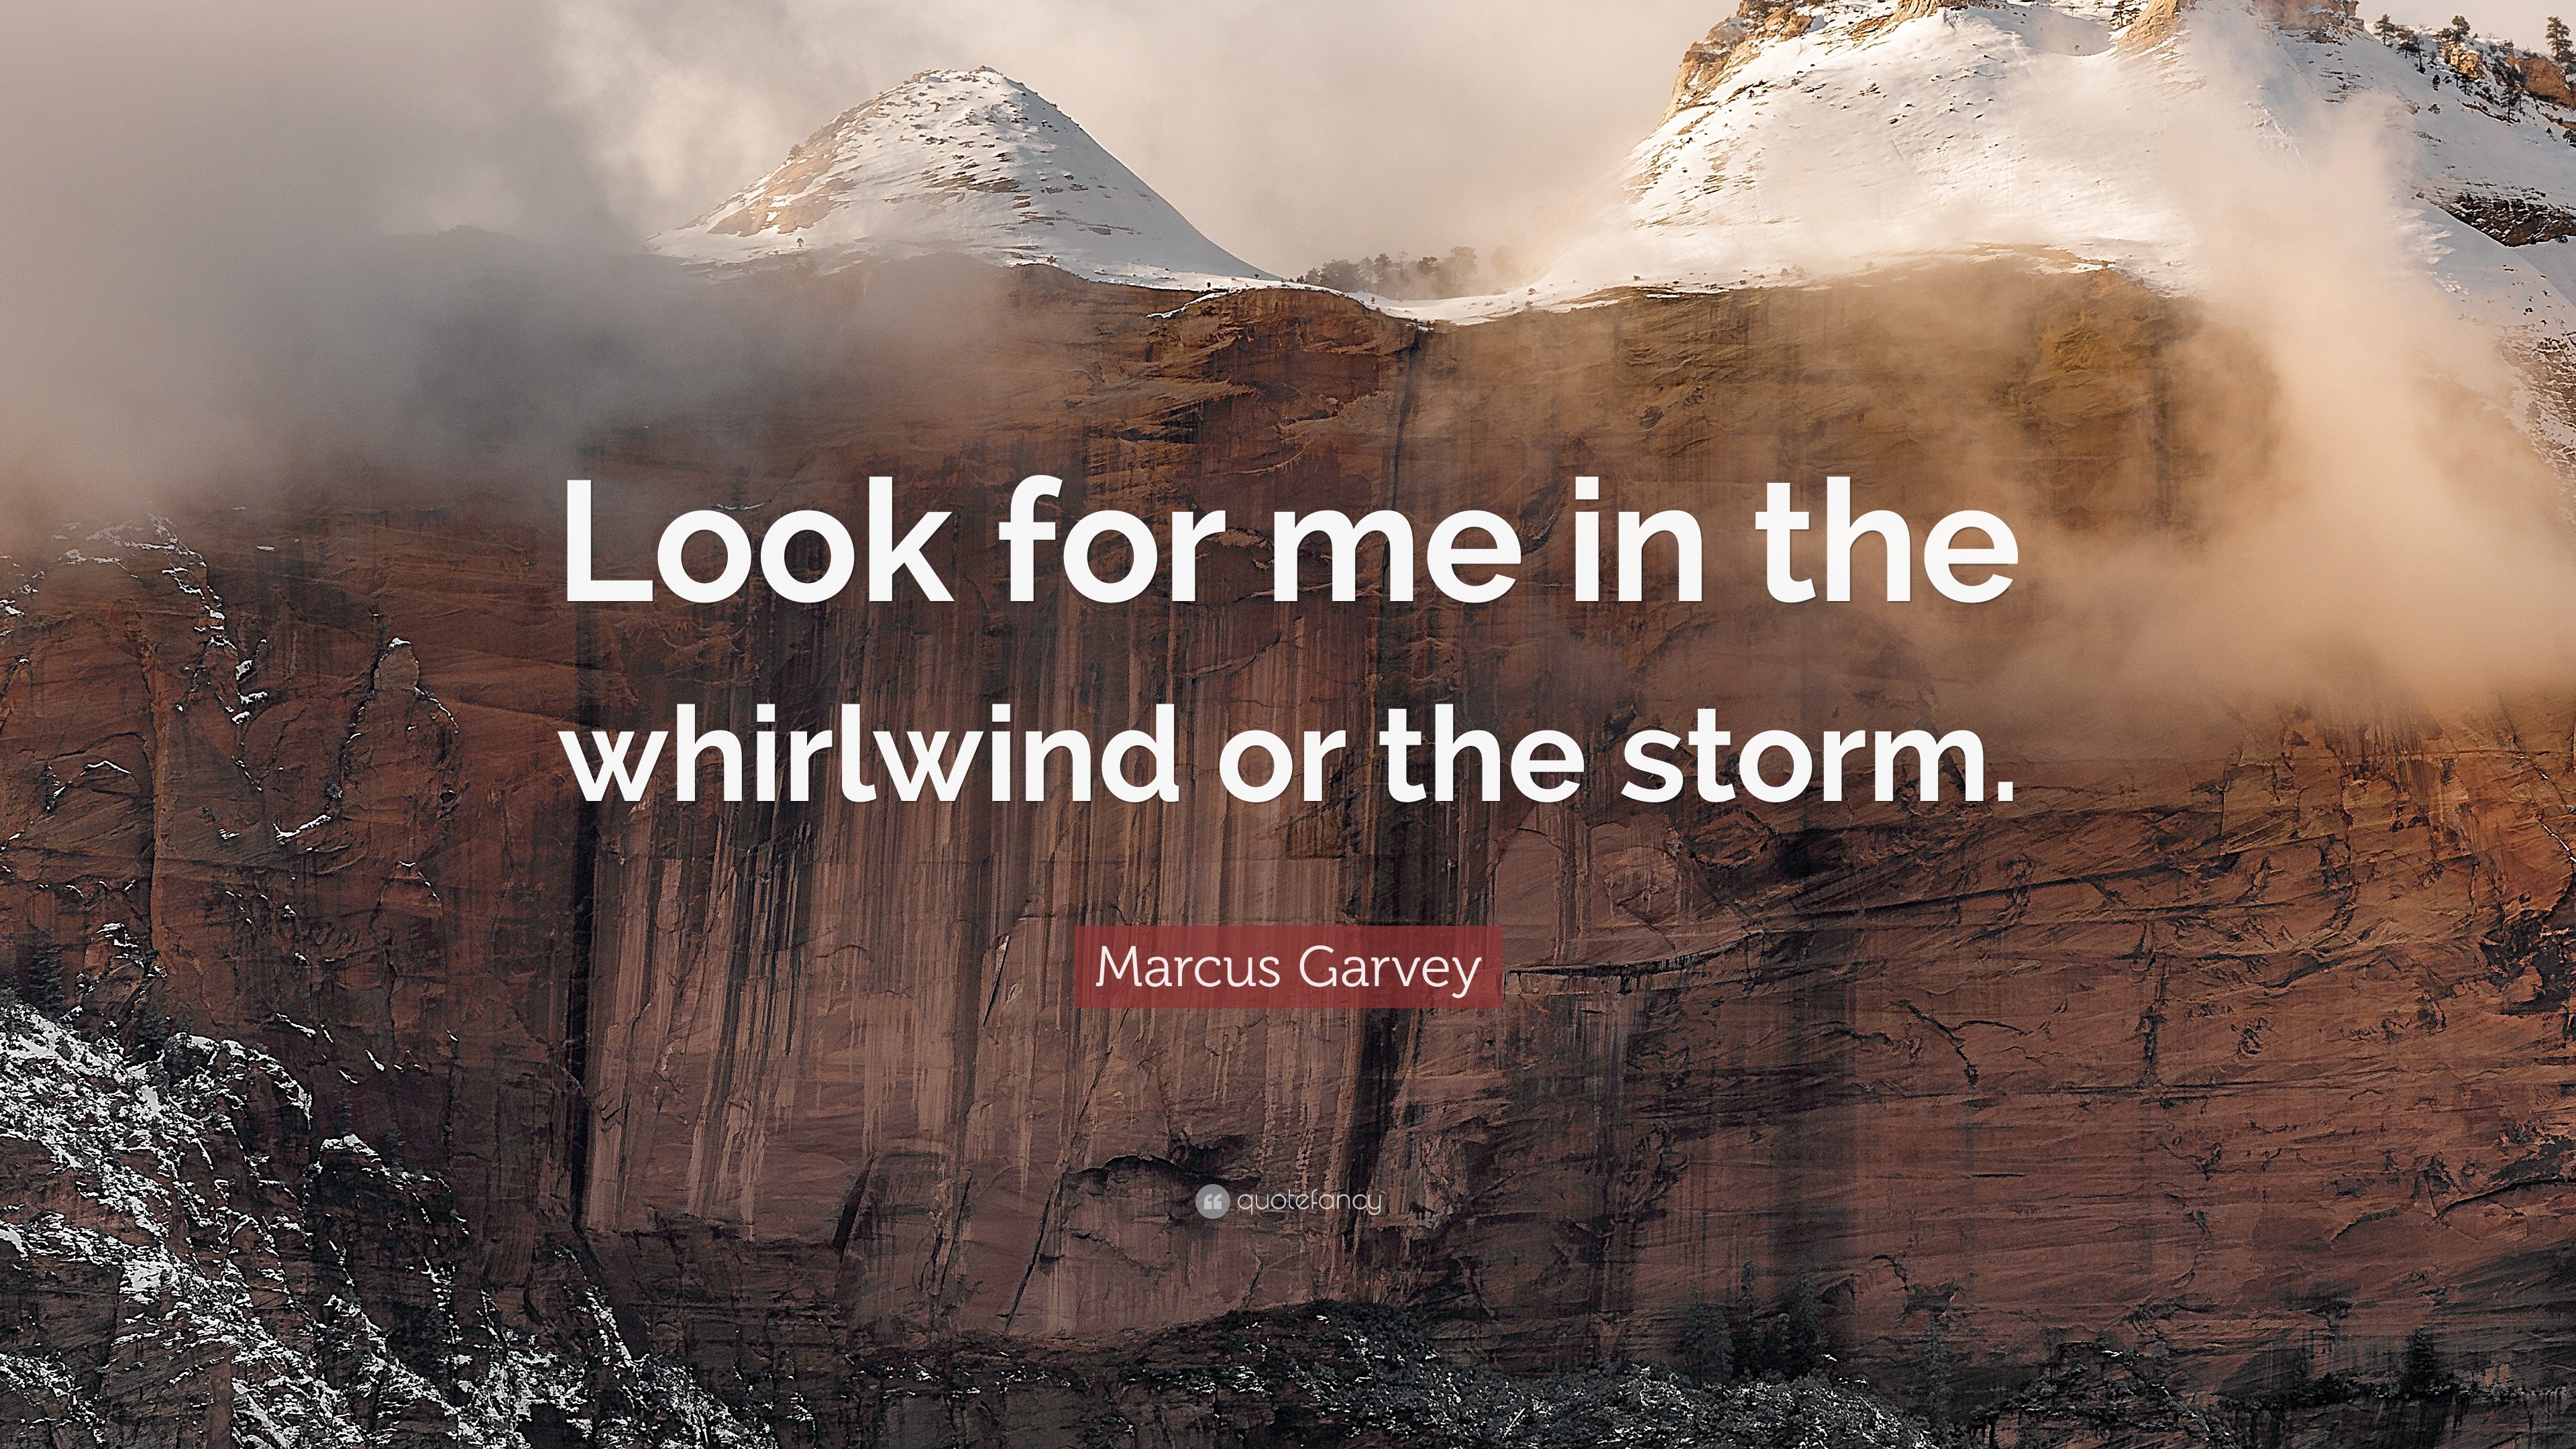 Marcus Garvey Quote: “Look for me in the whirlwind or the storm.”